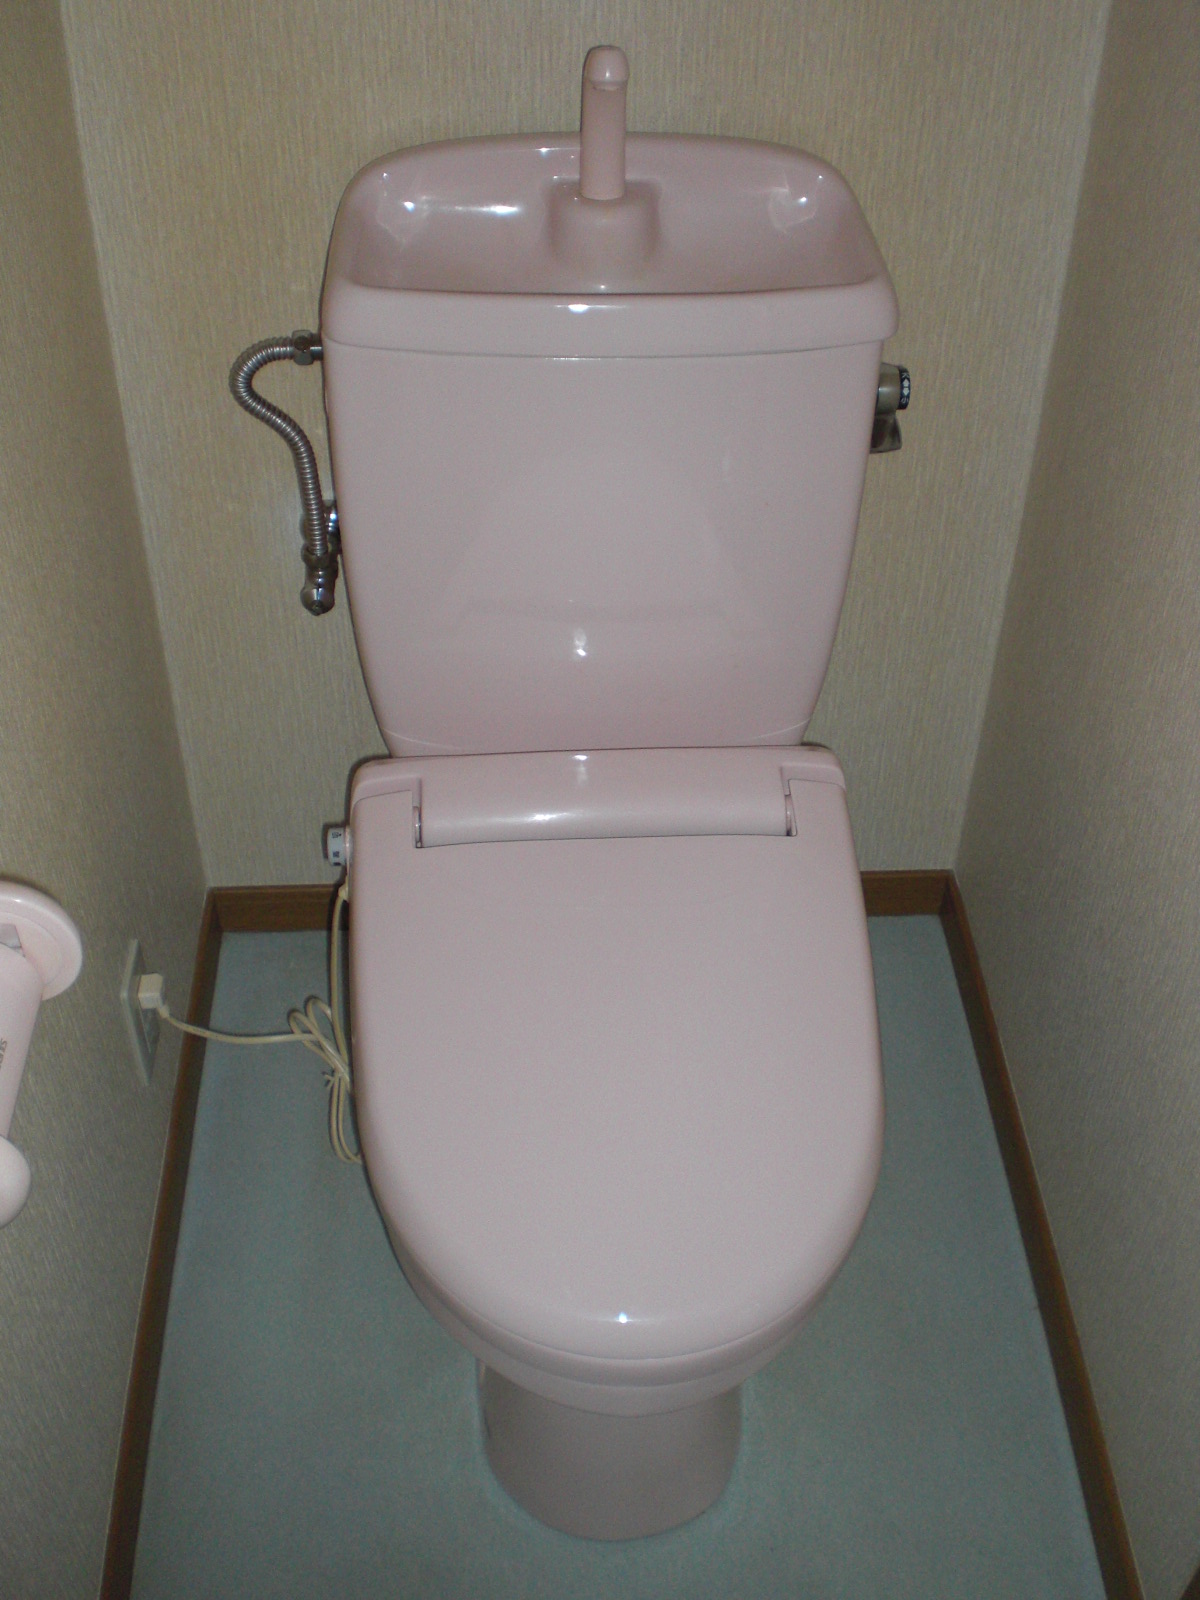 Toilet. Flush toilet with a heating function